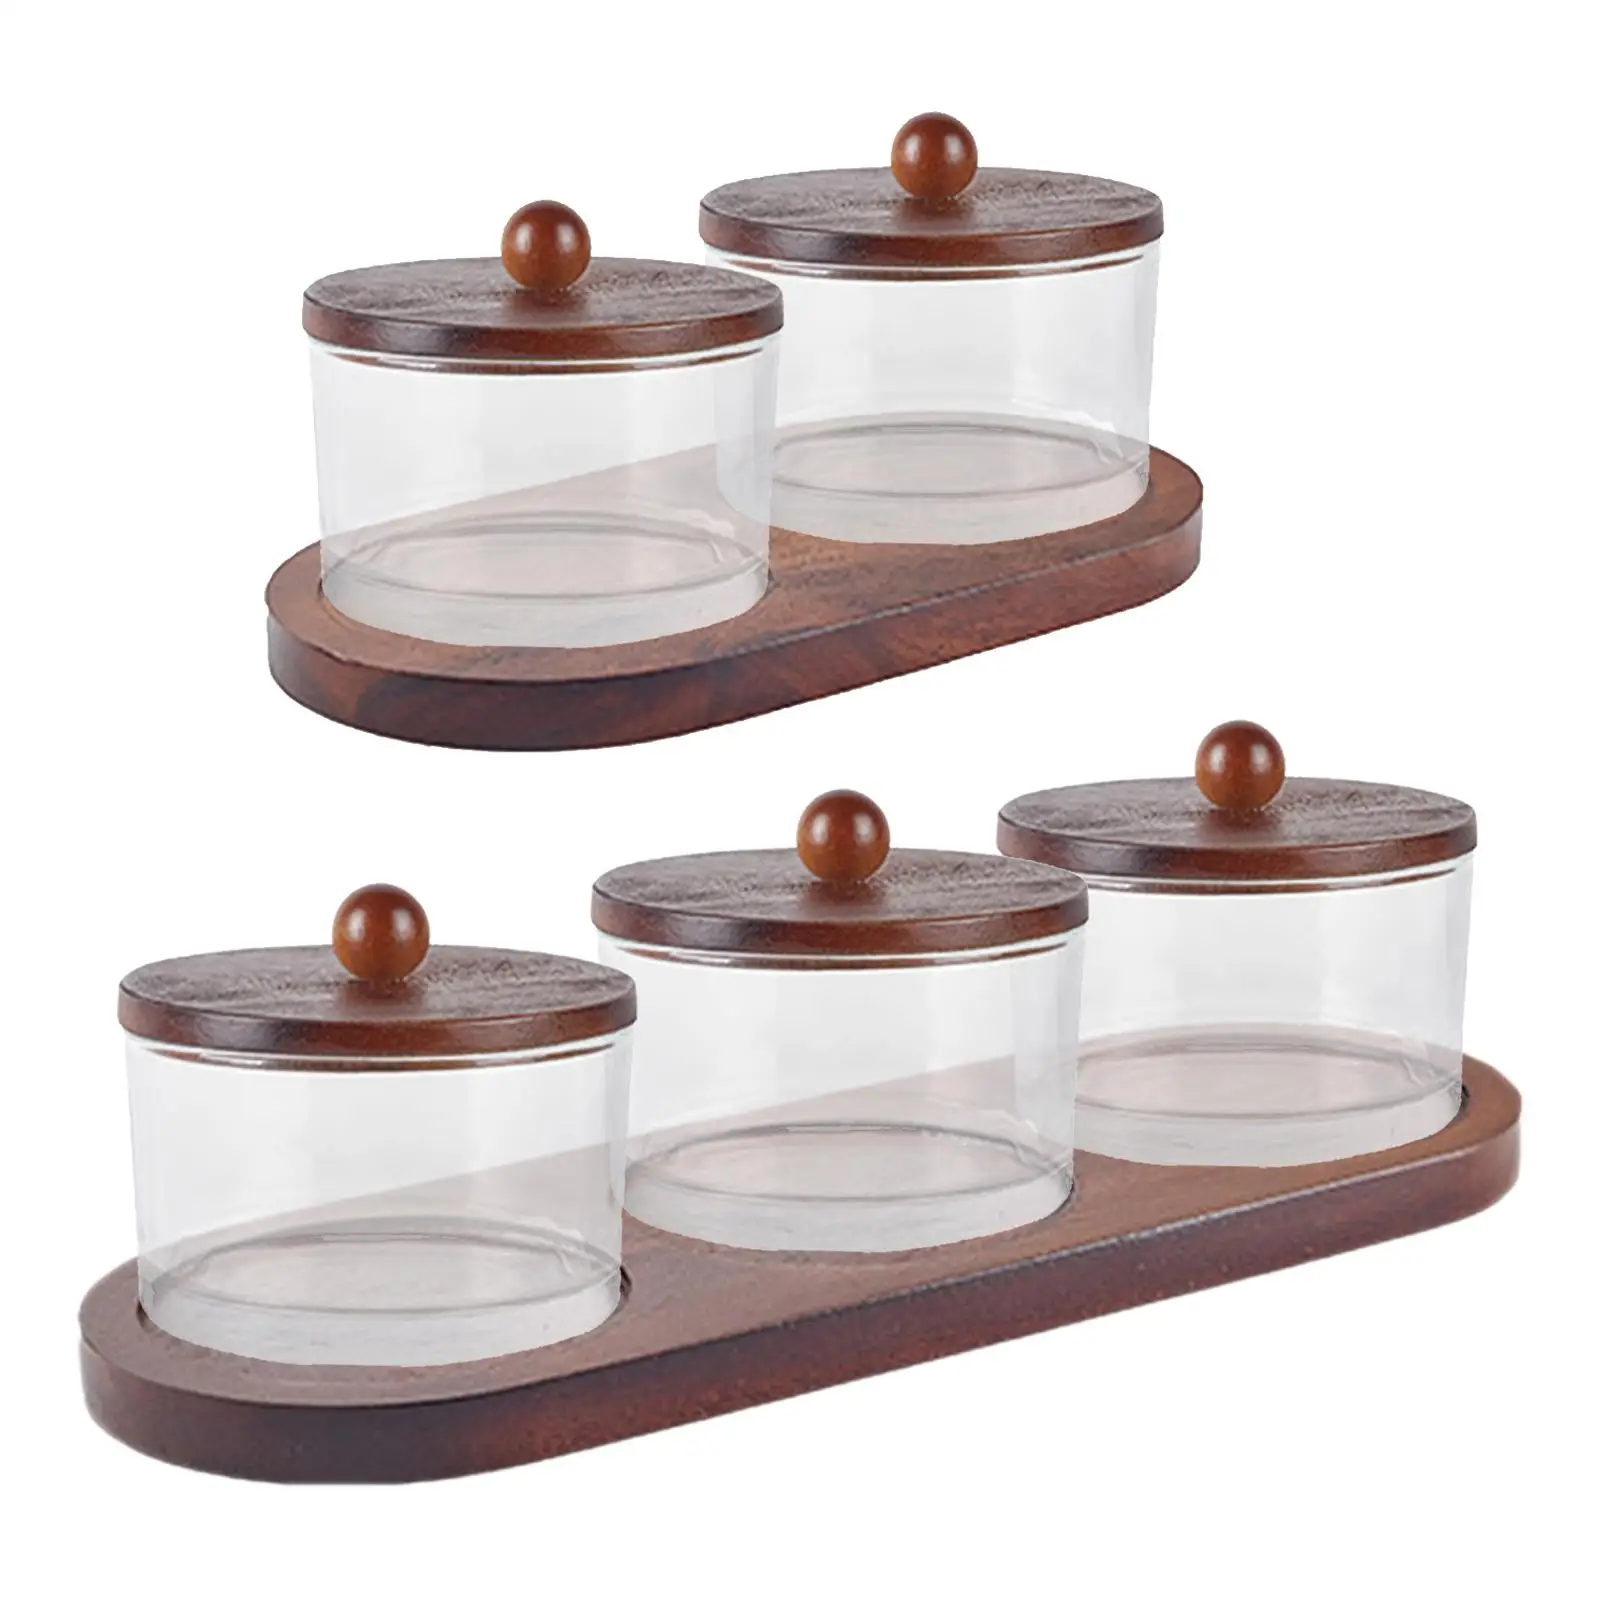 Divided Dishes Serving Dishes for Entertaining Japanese Transparent with Lid Bowl with Wooden Serving Tray for Nuts Snacks Chips